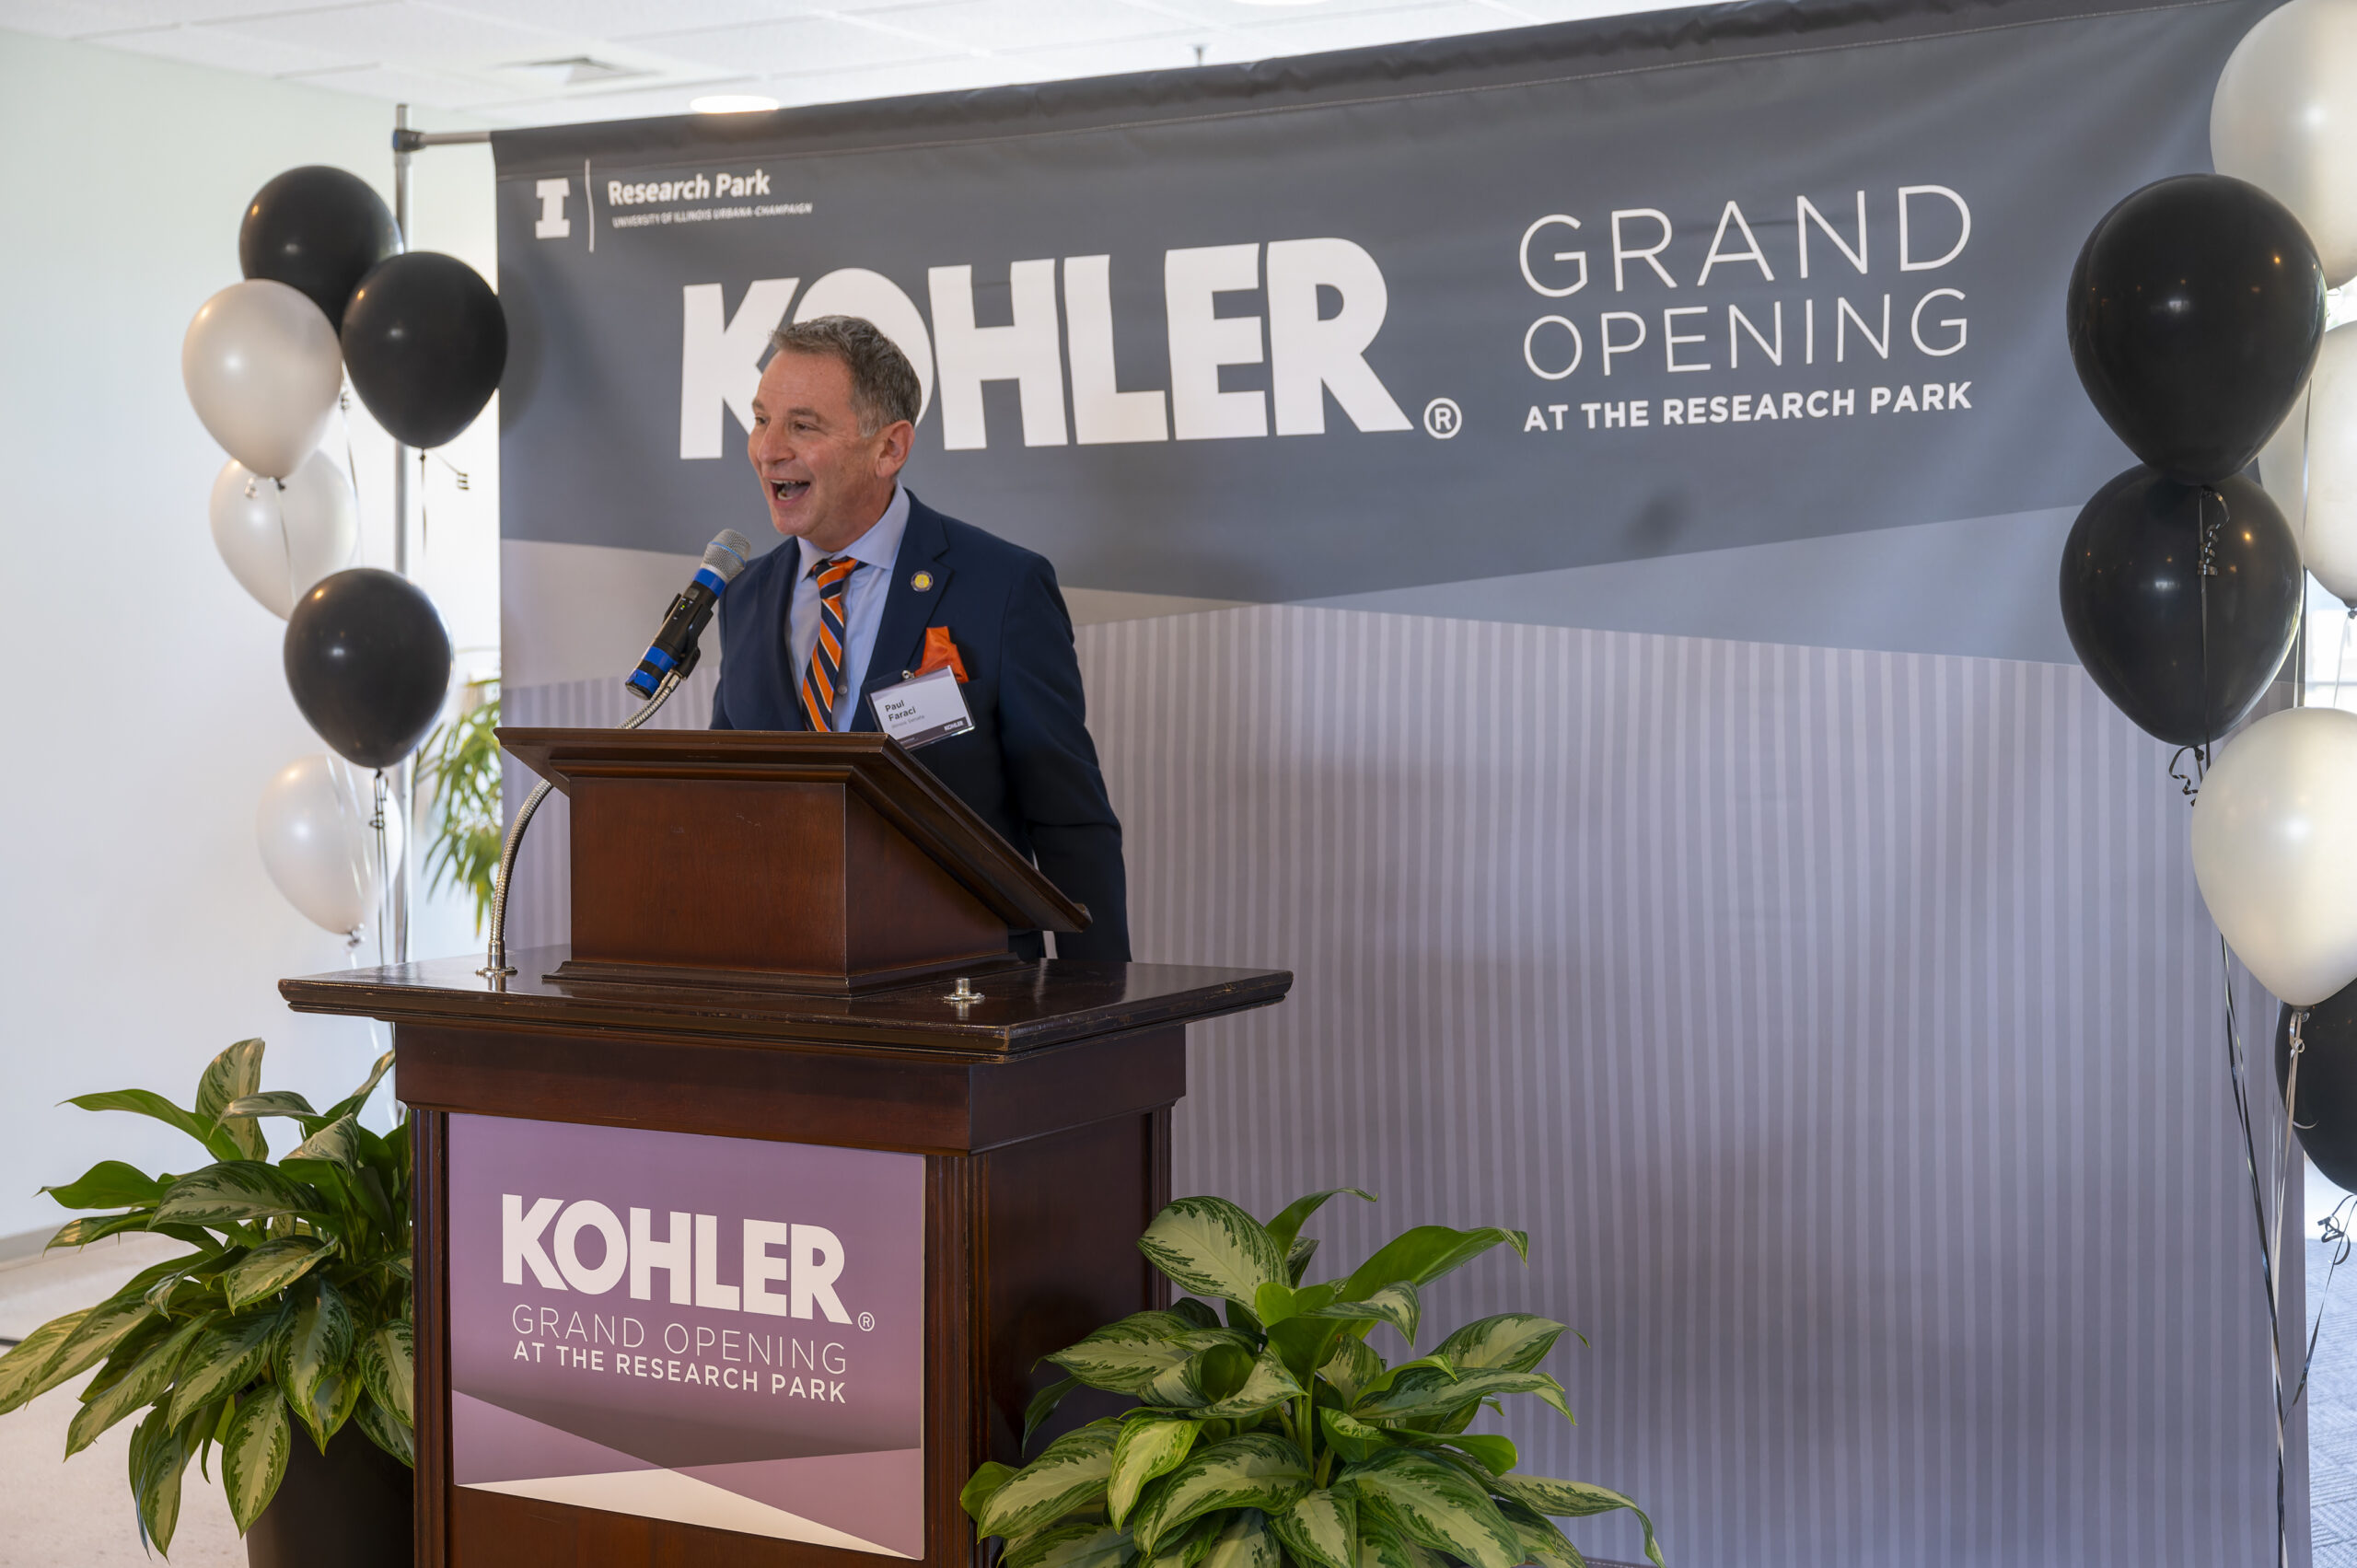 Senator Peter Faraci is enthusiastic about Kohler's presence in the Research Park.